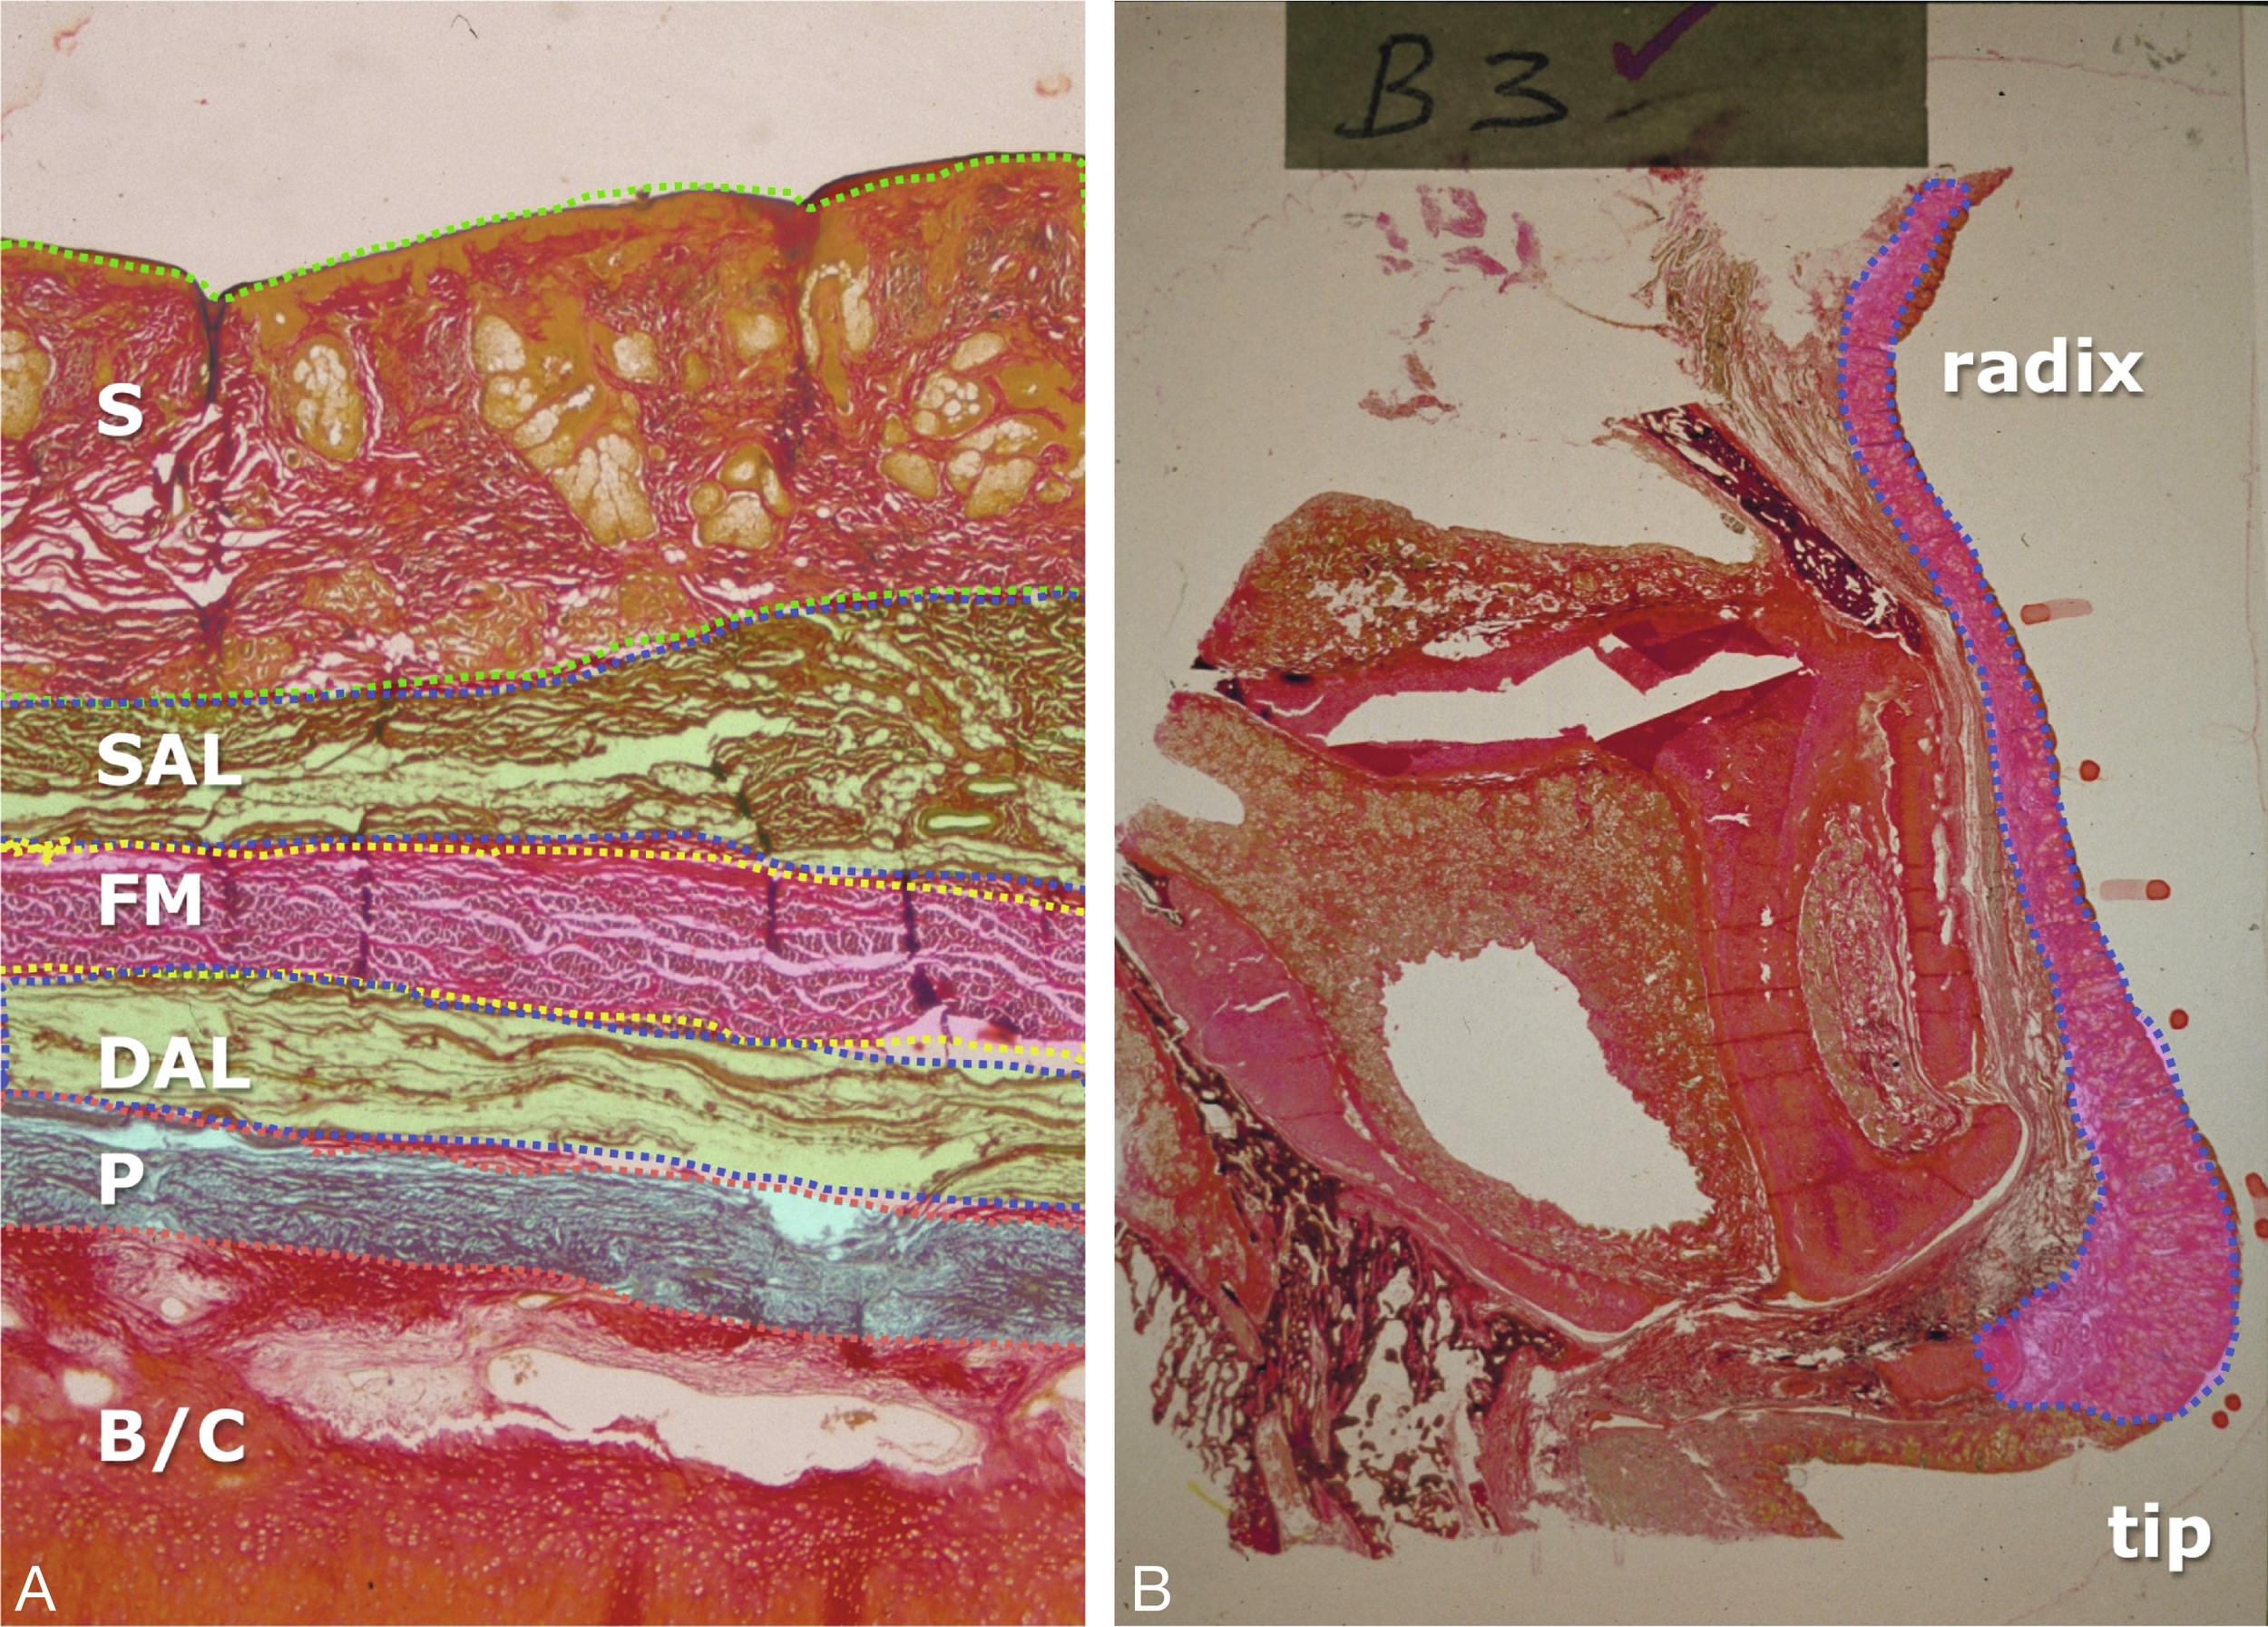 Fig. 22.1, (A) The five different soft tissue layers overlying the bony cartilaginous framework ( B/C ), namely: the overlying skin ( S ), superficial areolar layer ( SAL ), fibromuscular layer ( FM ), deep areolar layer ( DAL ), periosteum or perichondrium ( P ). (B) Sagittal section of the nose and septum showing the fibromuscular layer appearing as a continuous sheet sandwiched by the superficial and deep areolar layers. The thickness of the nasal skin increases from the radix to the tip.